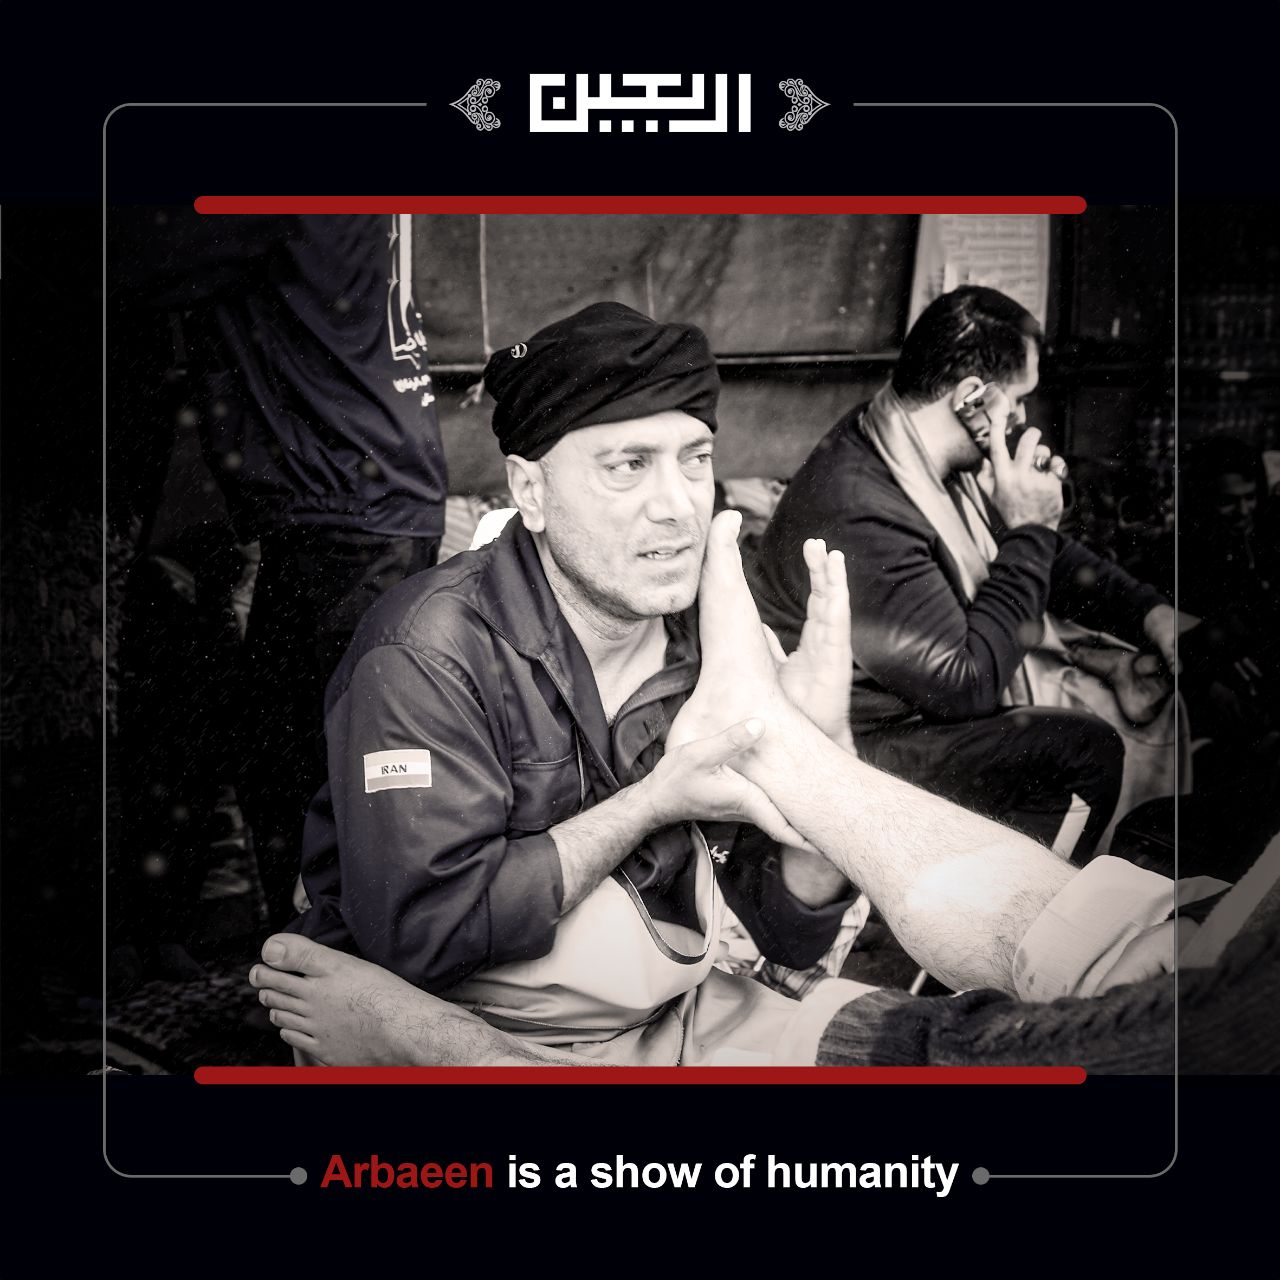 Arbaeen is a show of humanity